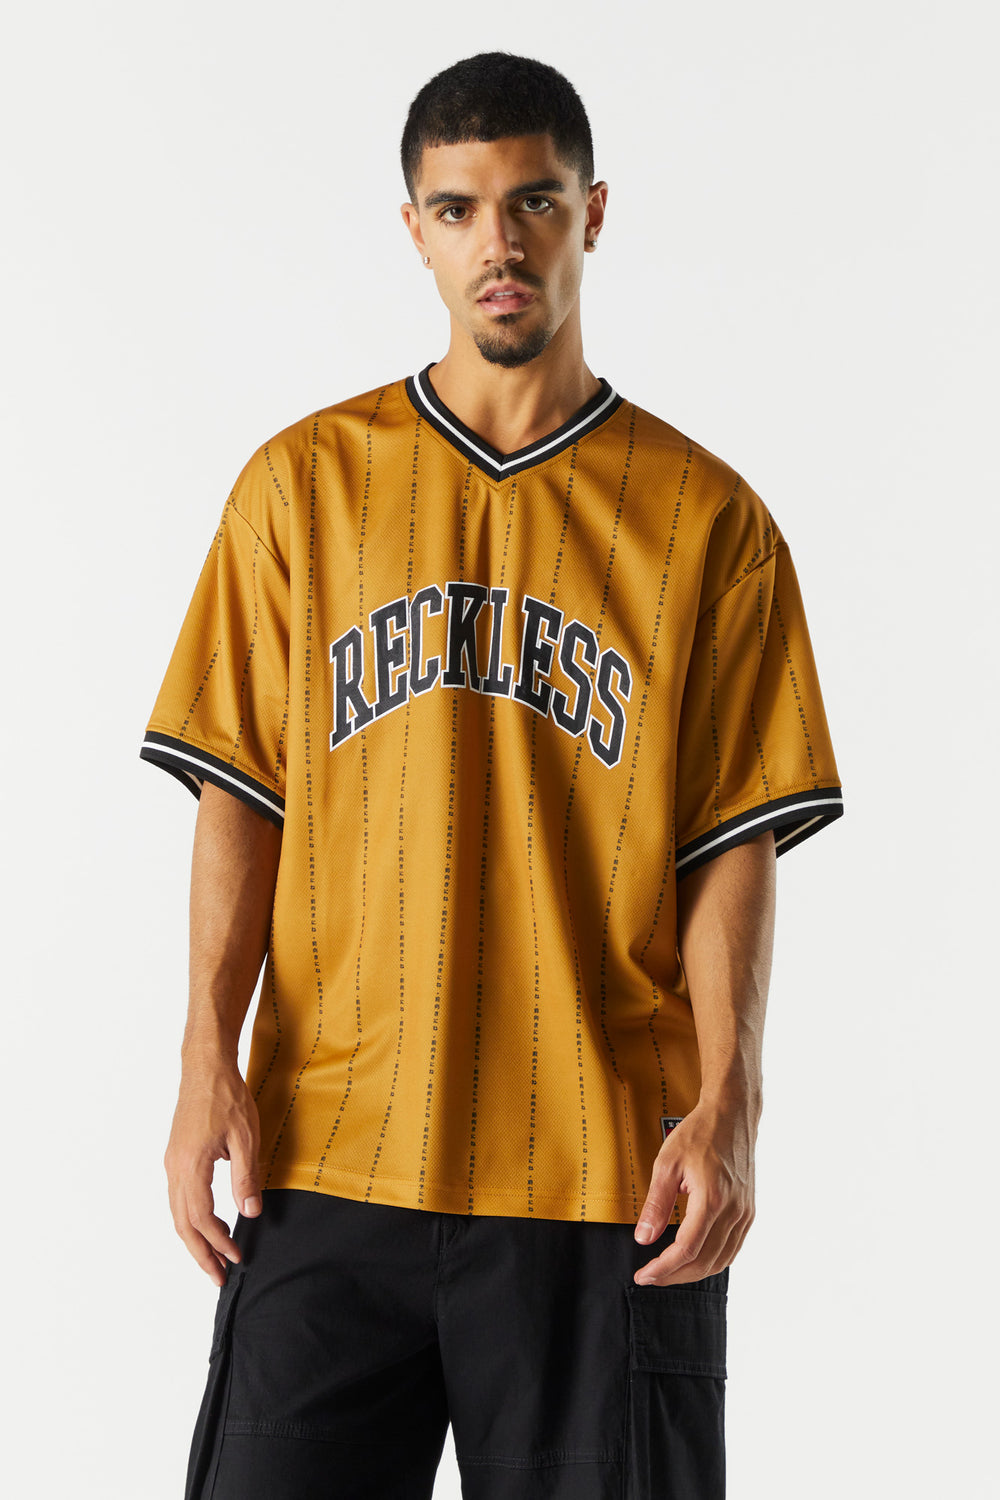 Reckless Graphic Baseball Top Reckless Graphic Baseball Top 1